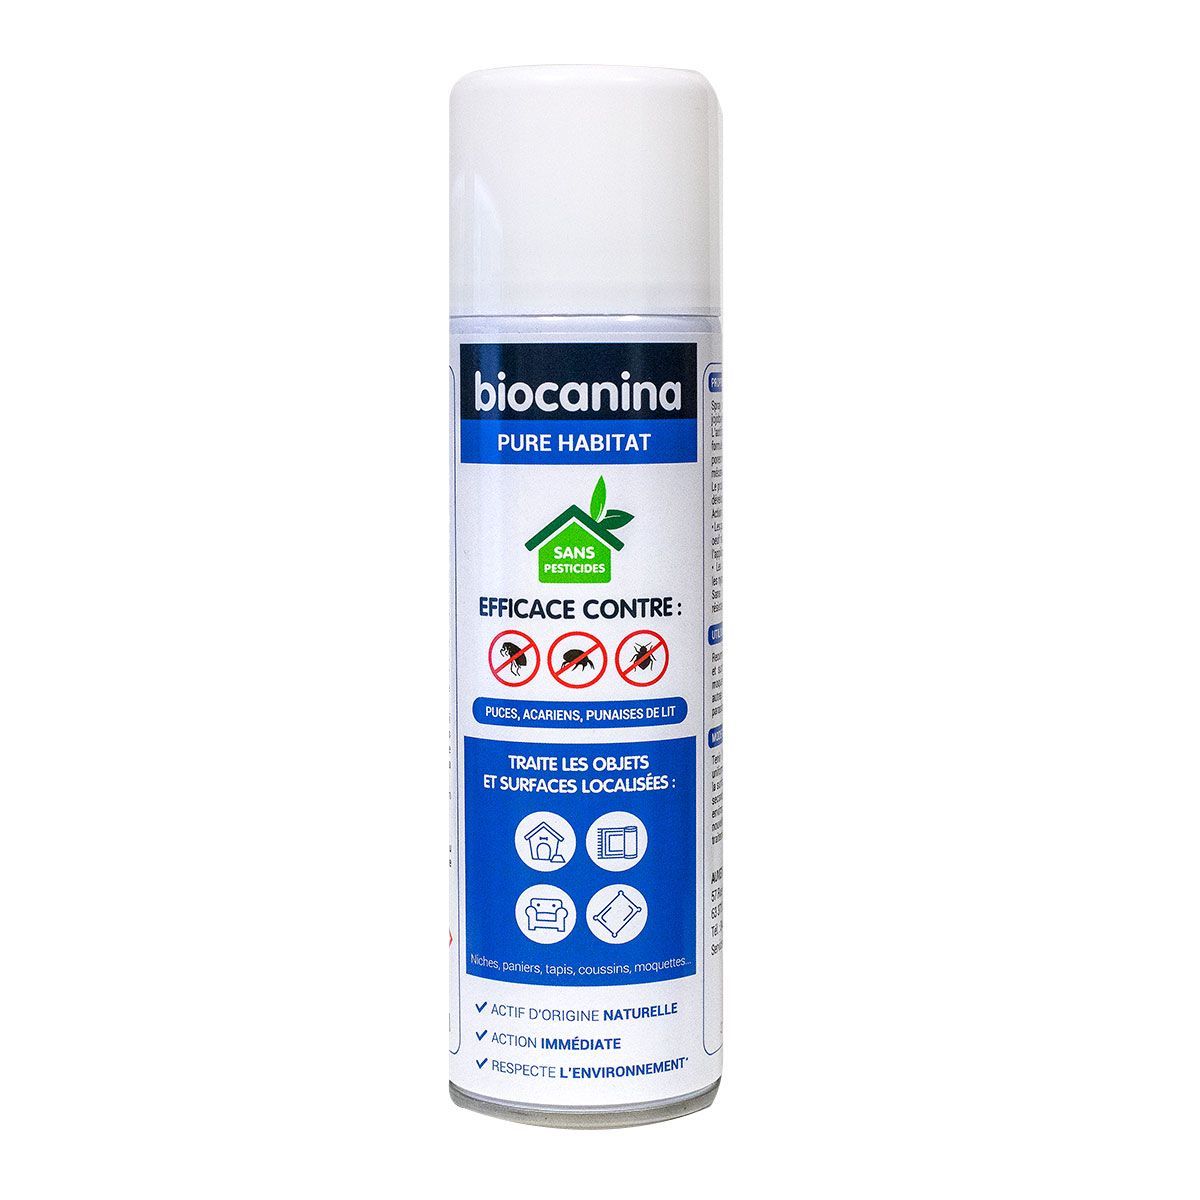 Spray insecticides Eco logis Biocanina - anti puces, tiques et